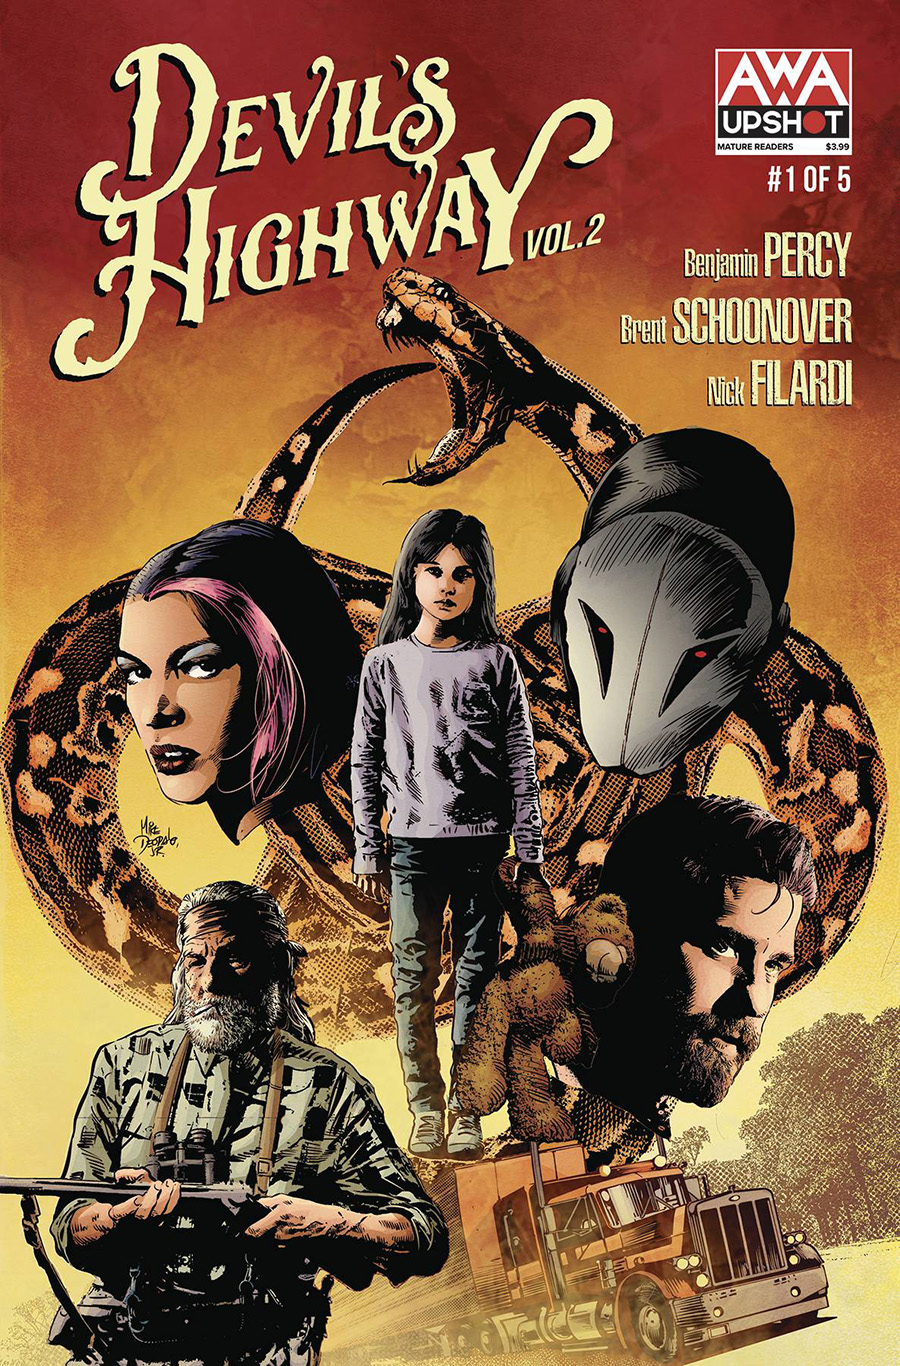 Devils Highway Vol 2 #1 Cover B Variant Mike Deodato Jr Cover